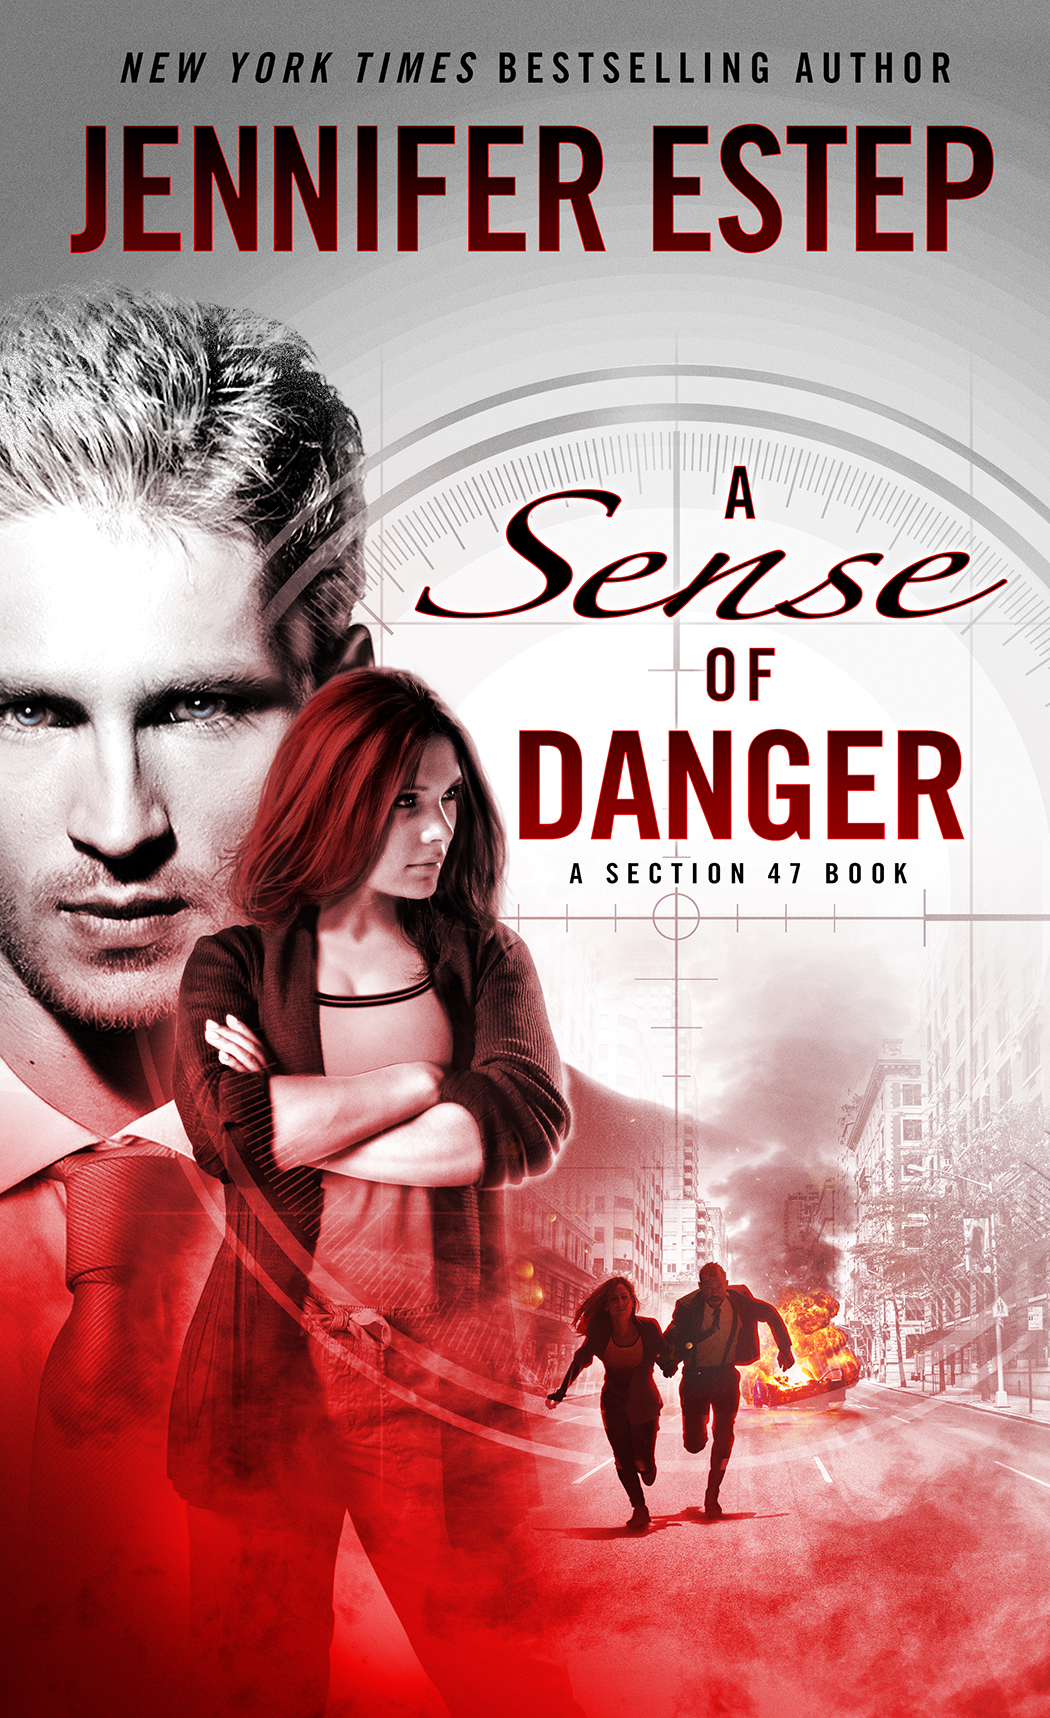 A Sense of Danger red and white cover art with couple, sniper scope, and explosion